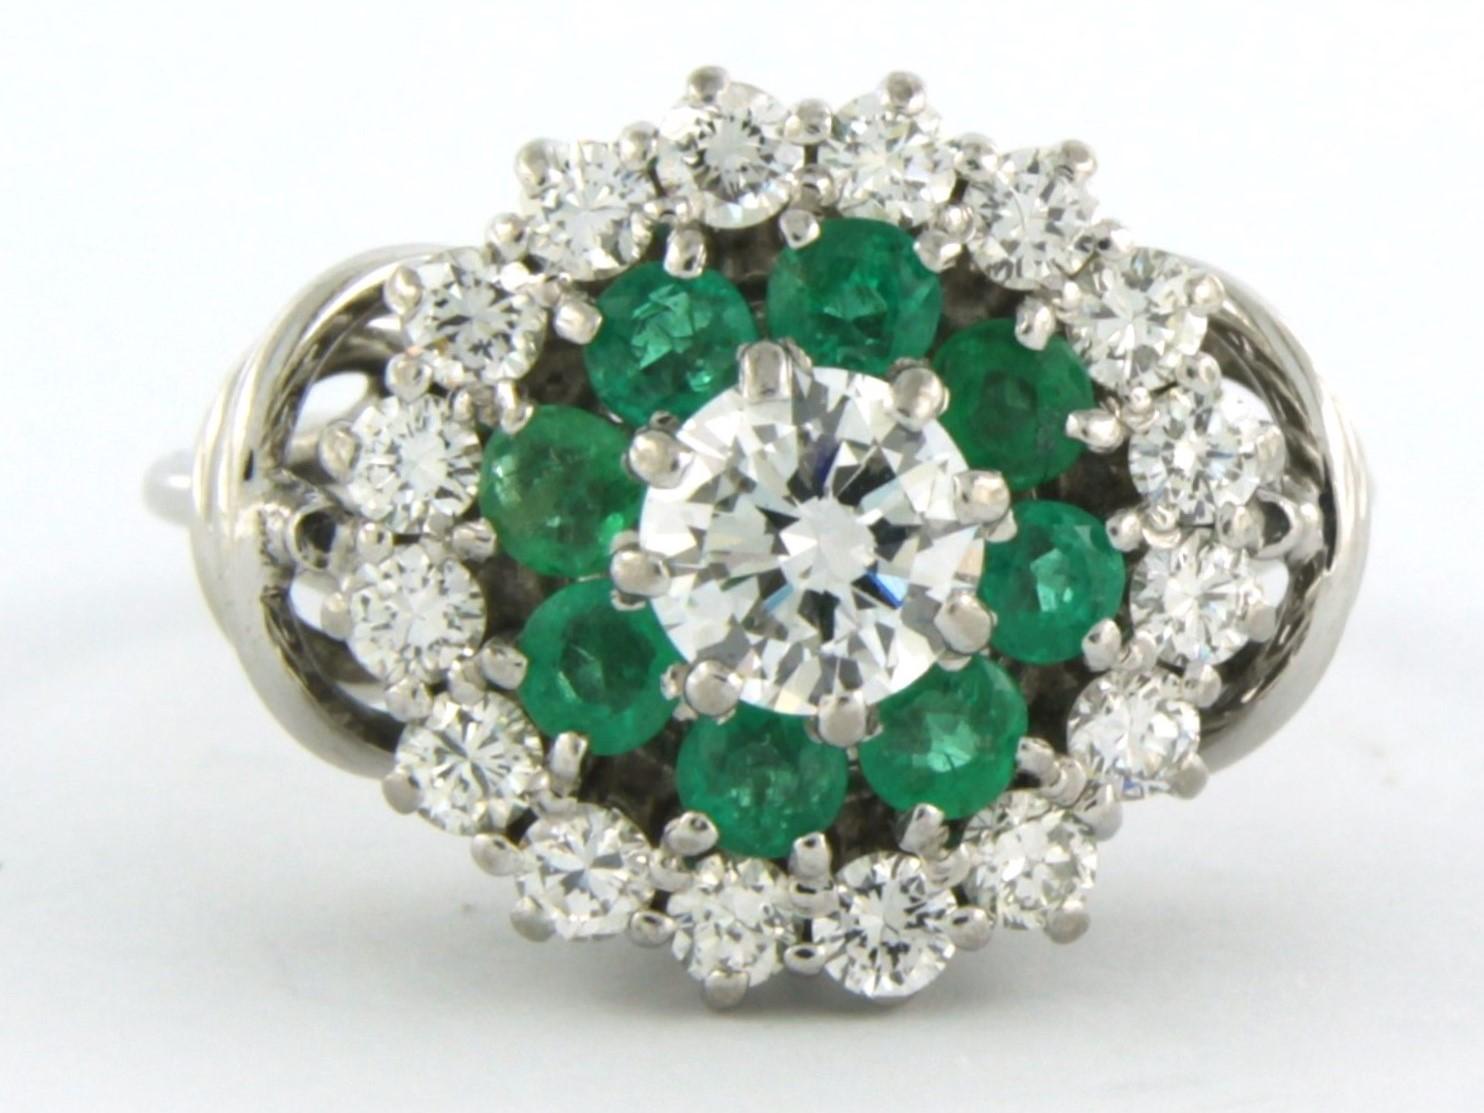 18k white gold ring set with a brilliant cut diamond in the center. 0.50ct - F/G - VS - and an entourage of emerald and surrounding brilliant cut diamonds up to. 1.00ct - F/G - VS/SI - ring size U.S 5.25 - EU. 15(50)

detailed description:

the top